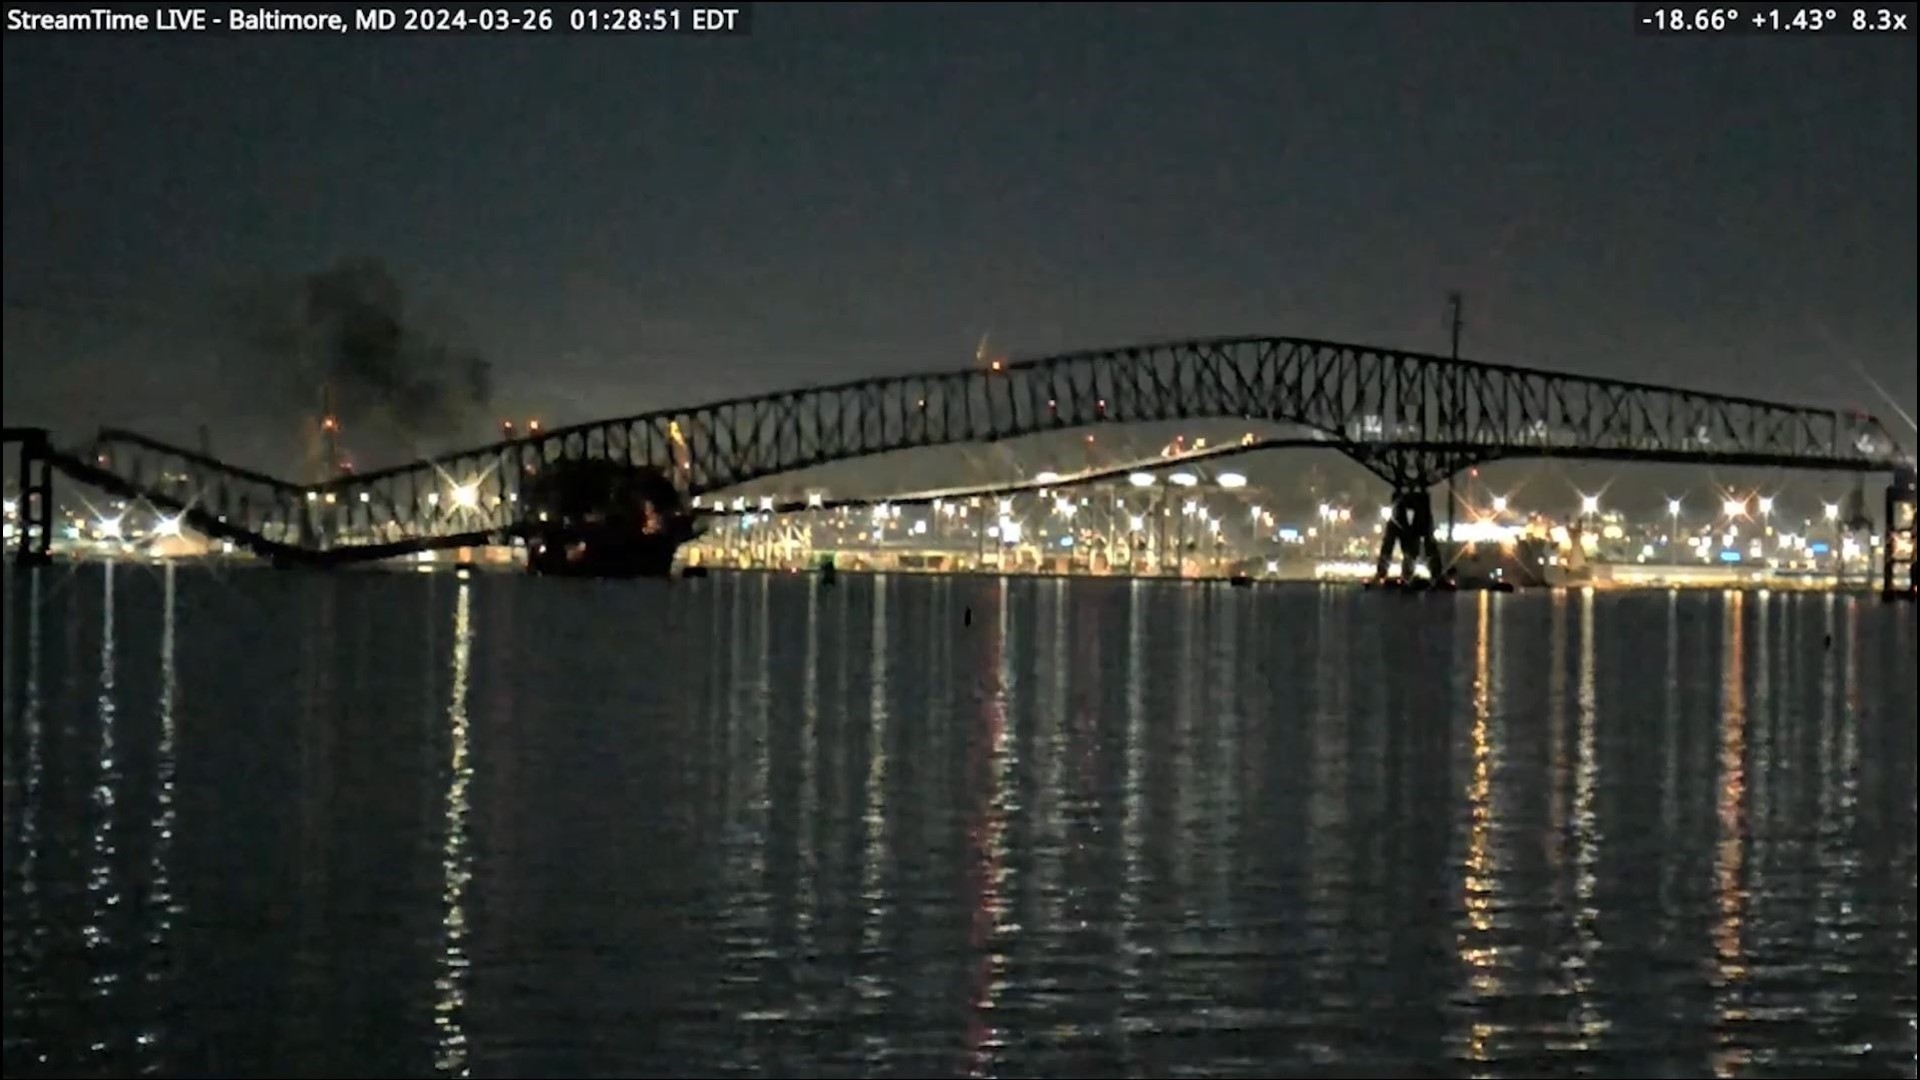 This is the moment the Francis Scott Key Bridge in Baltimore, Maryland came down.